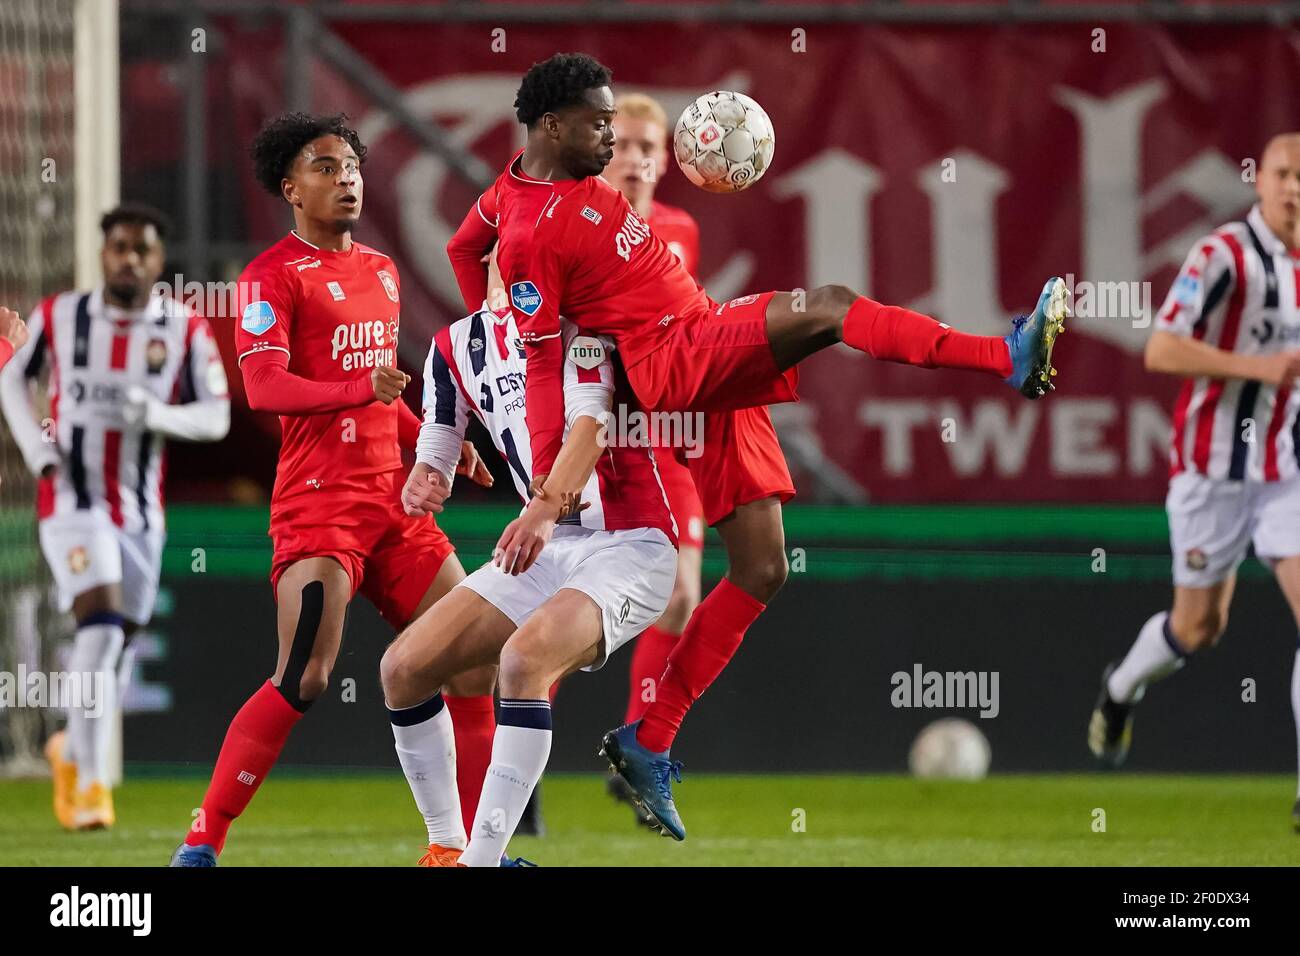 ,  - MARCH 6: Queensy Menig of FC Twente during the  match between  and  at  on March 6, 2021 in ,  (Photo by Jeroen Meuwsen/Orange Pictures) Stock Photo